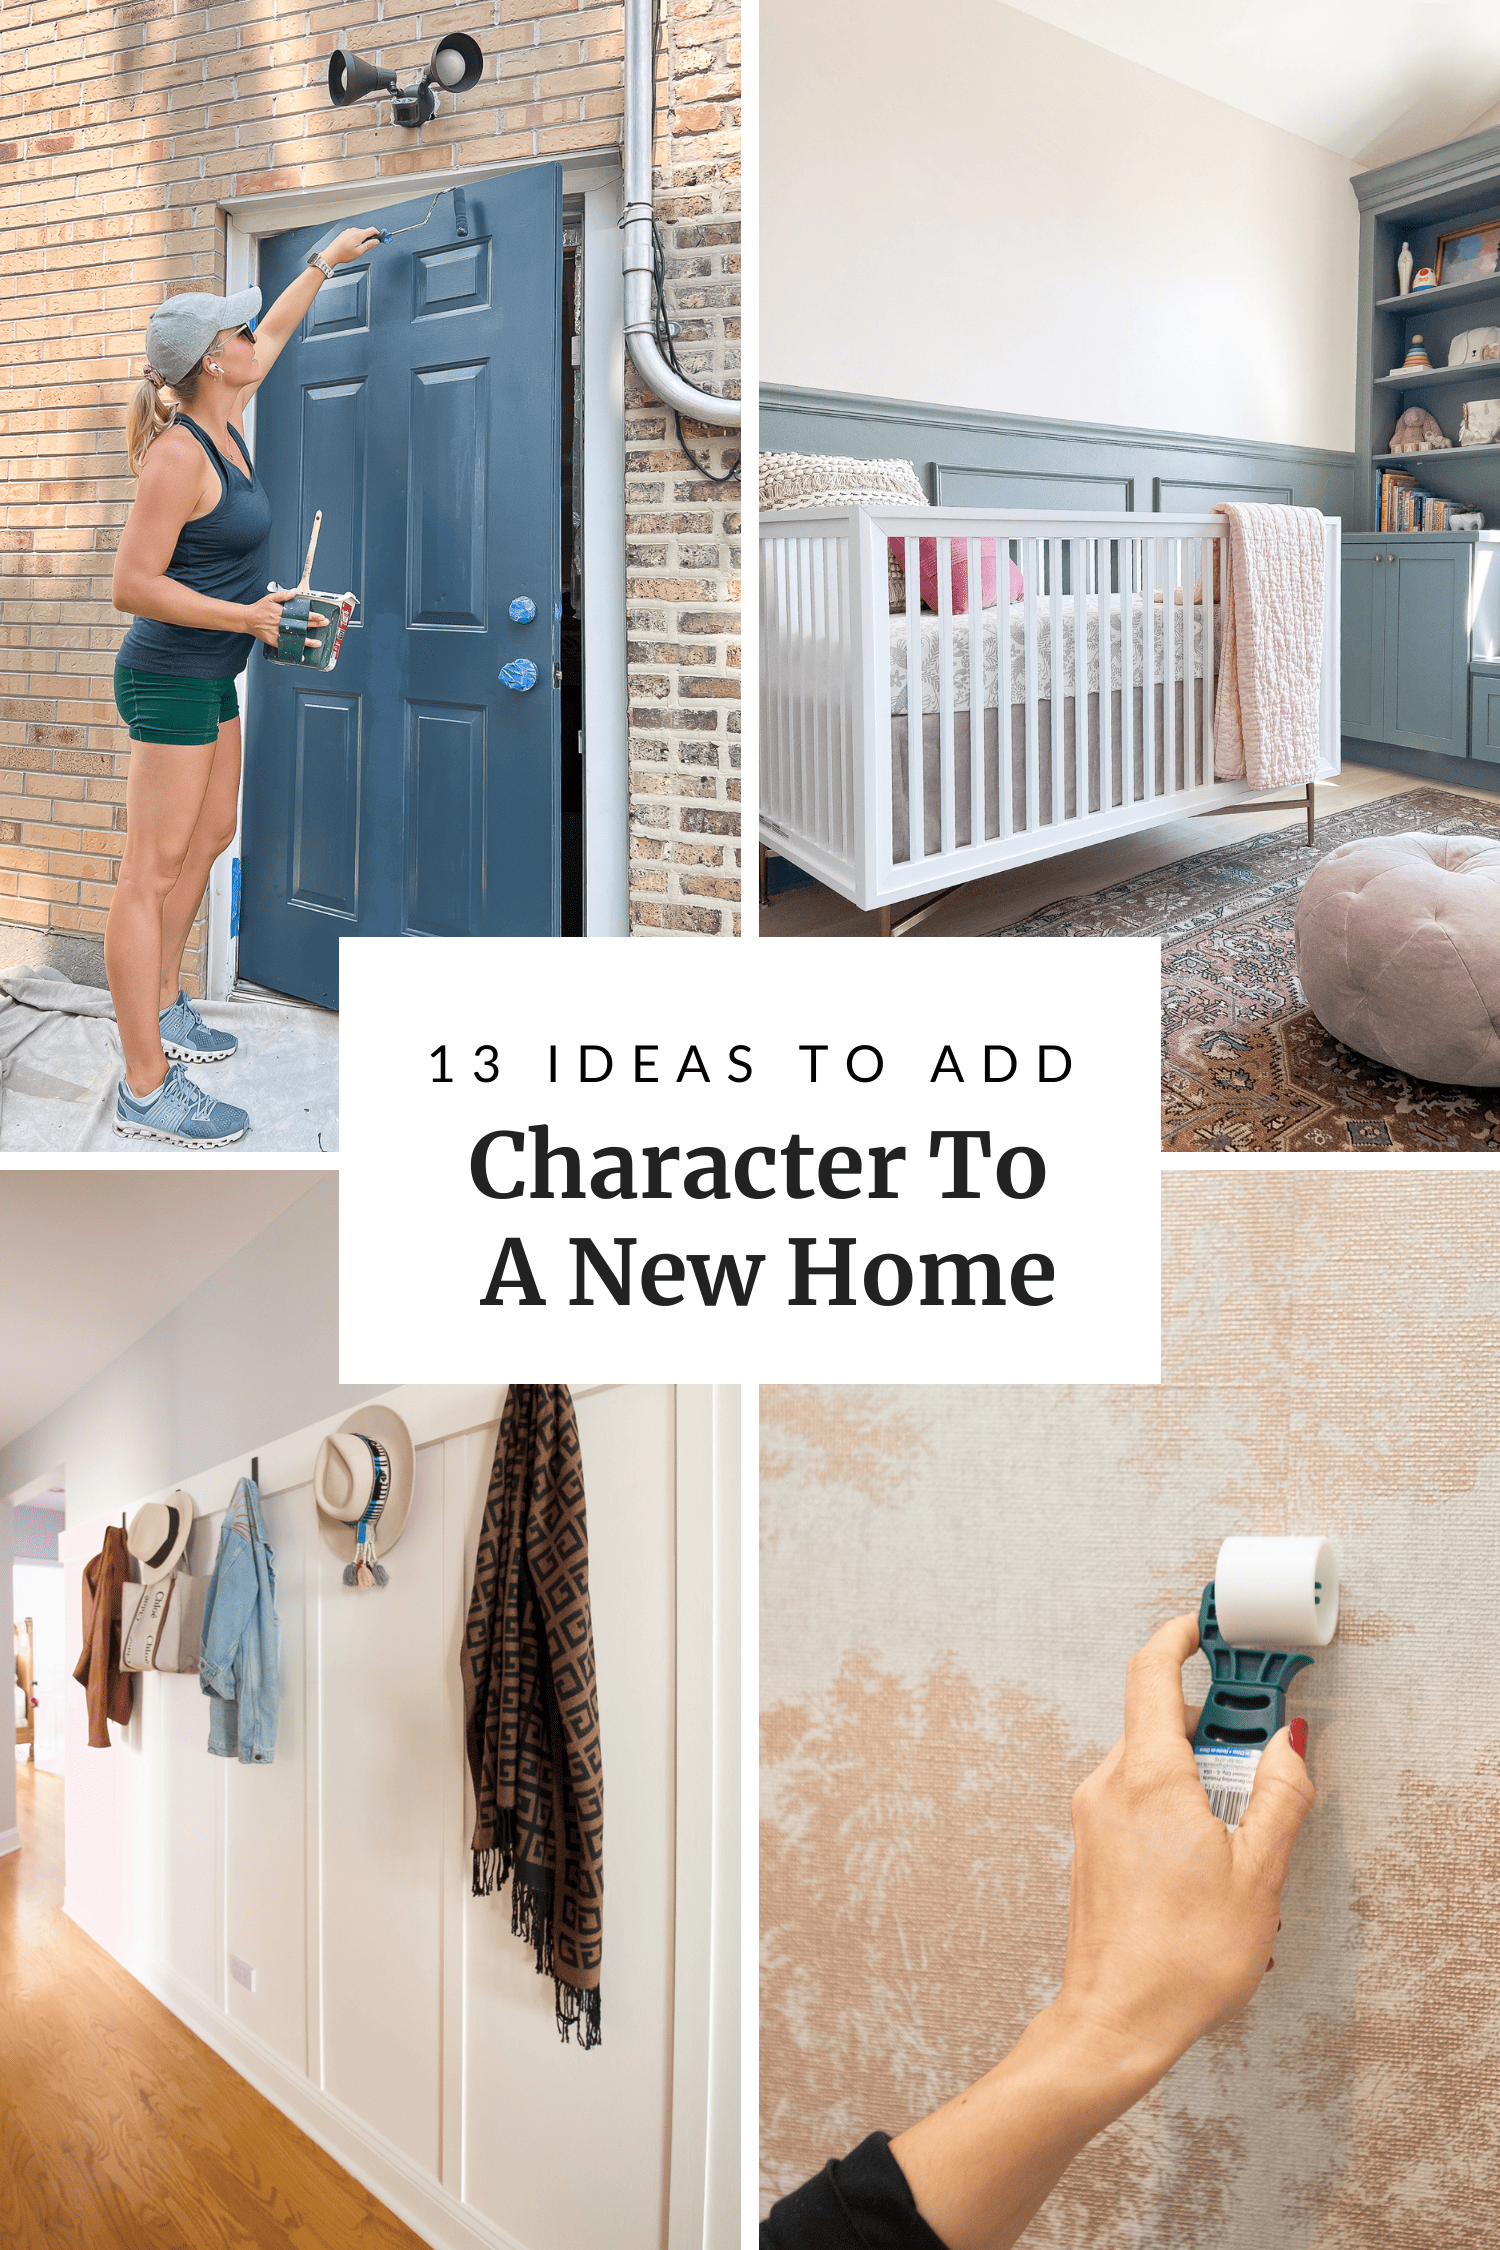 13 ideas to add character to new home